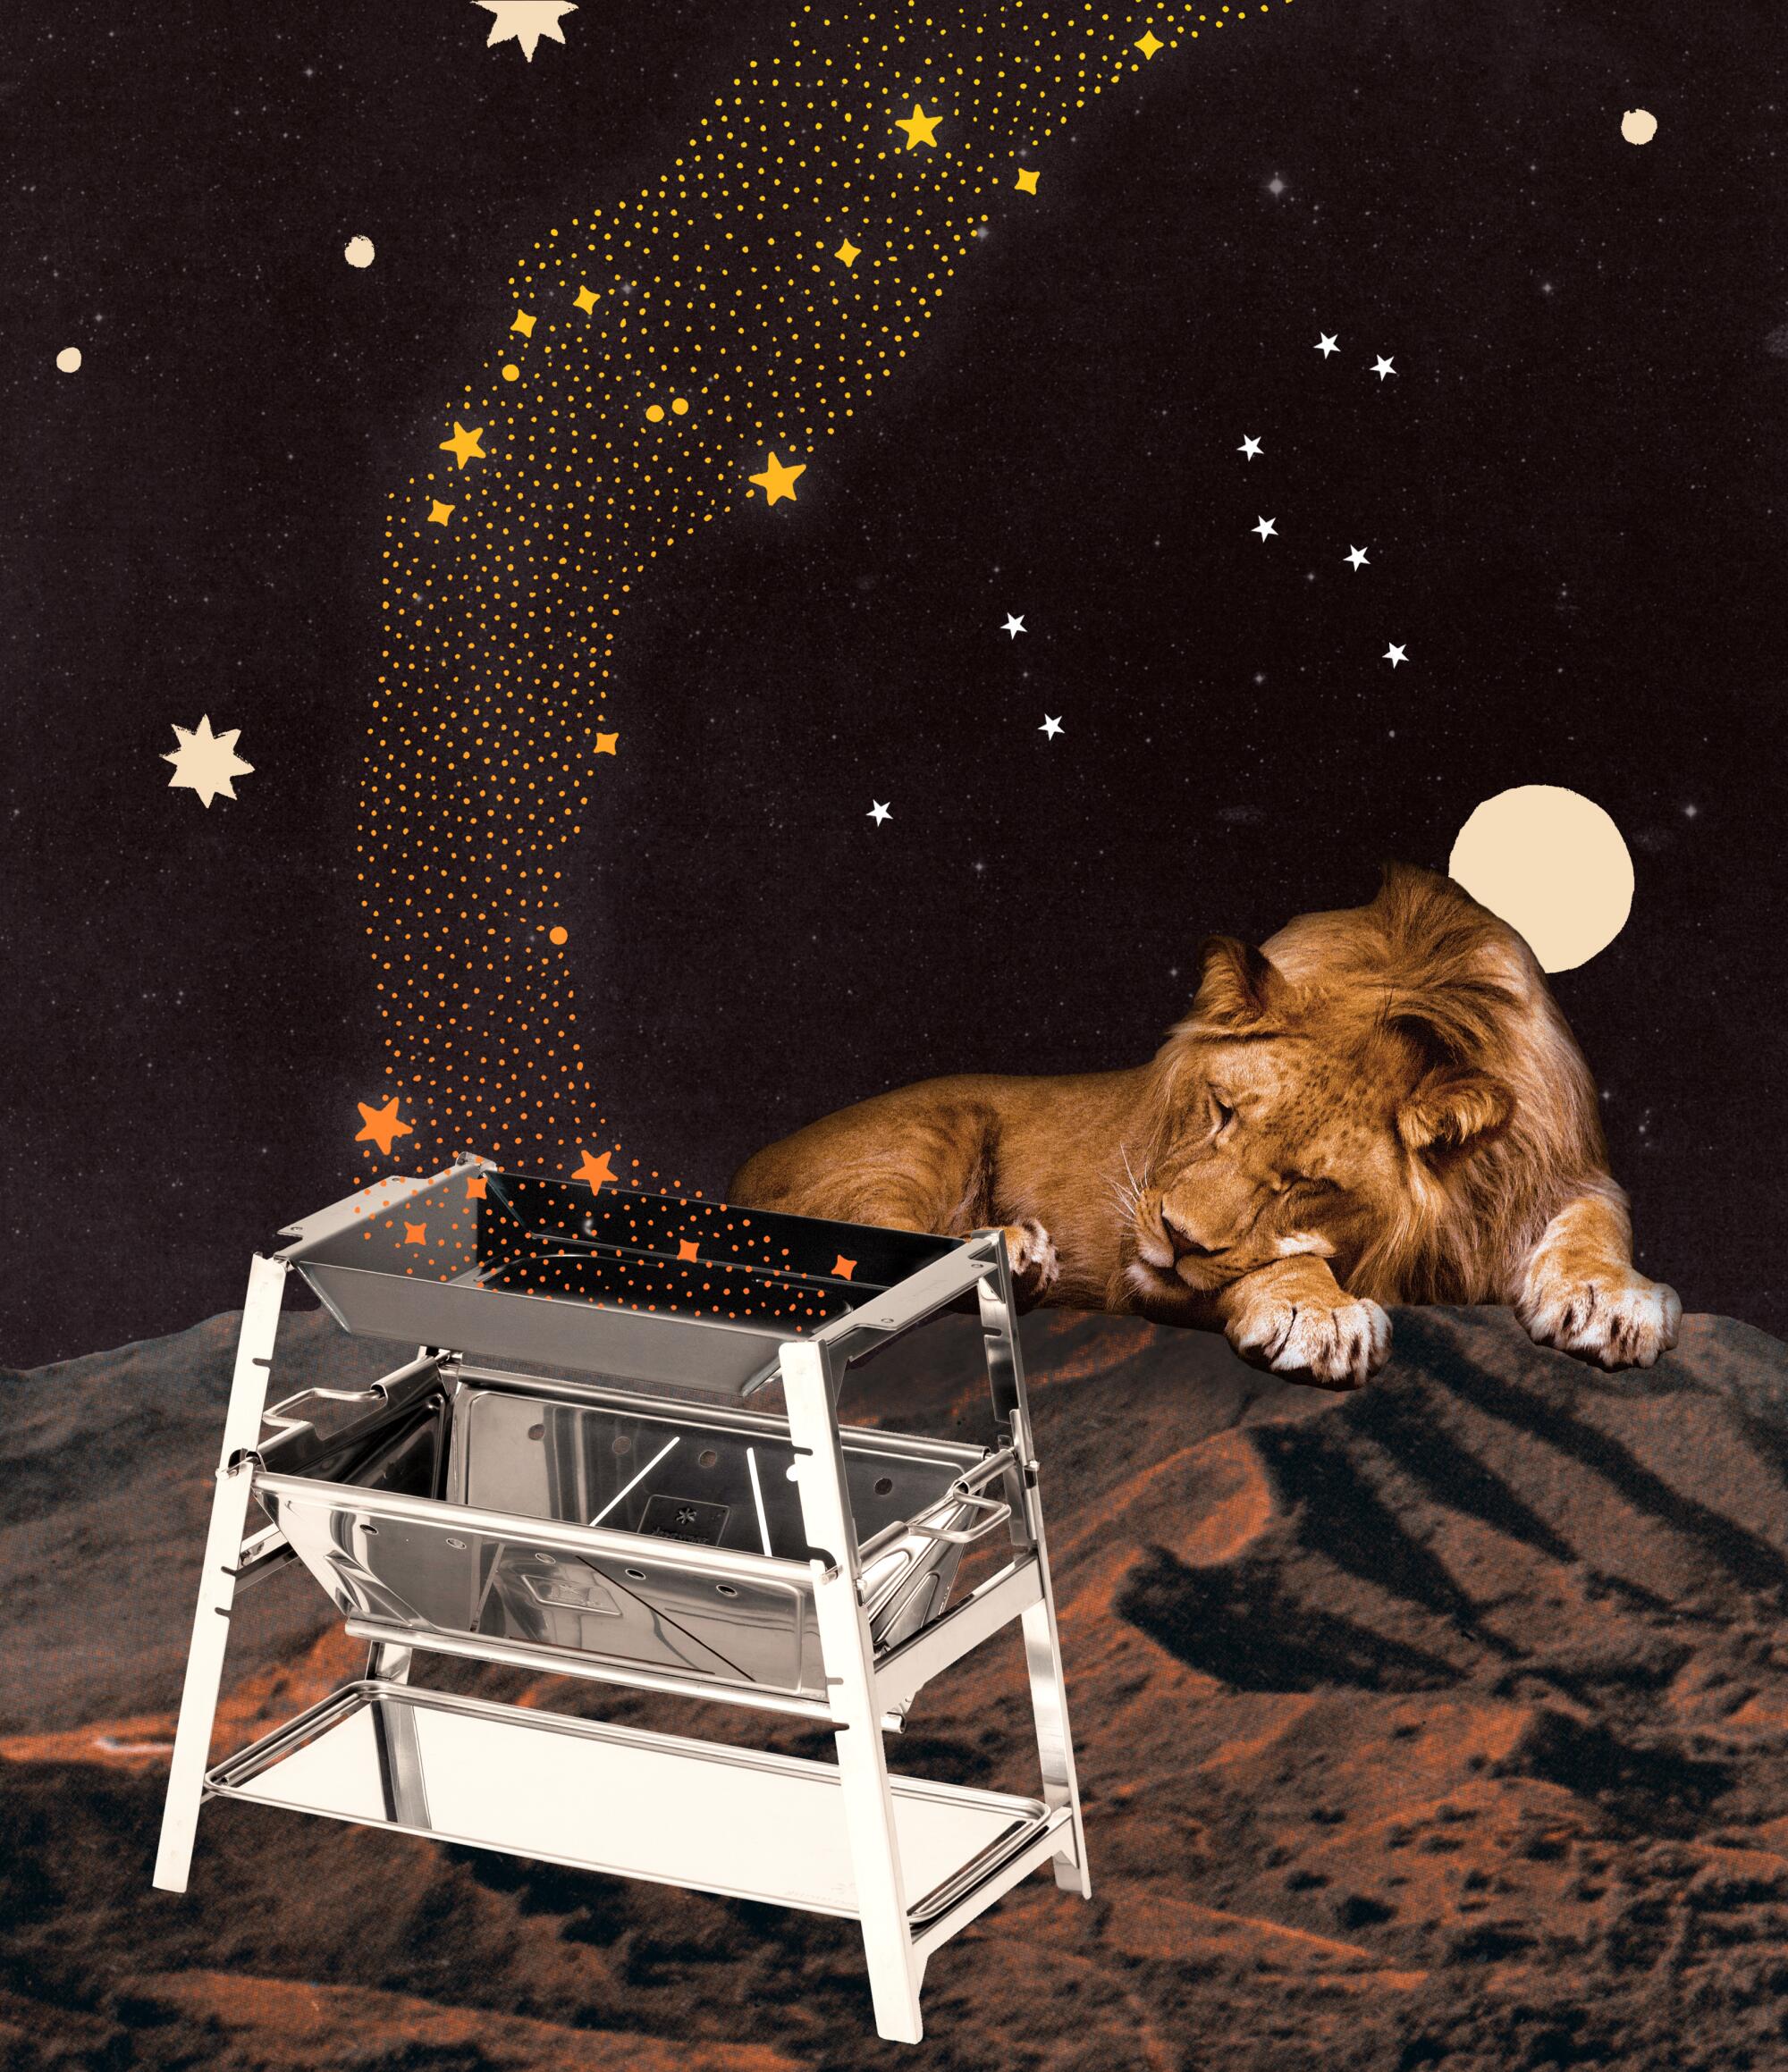 surreal collage of a portable burner with illustrated sparks flying above with a lion lays on a celestial landscape behind it